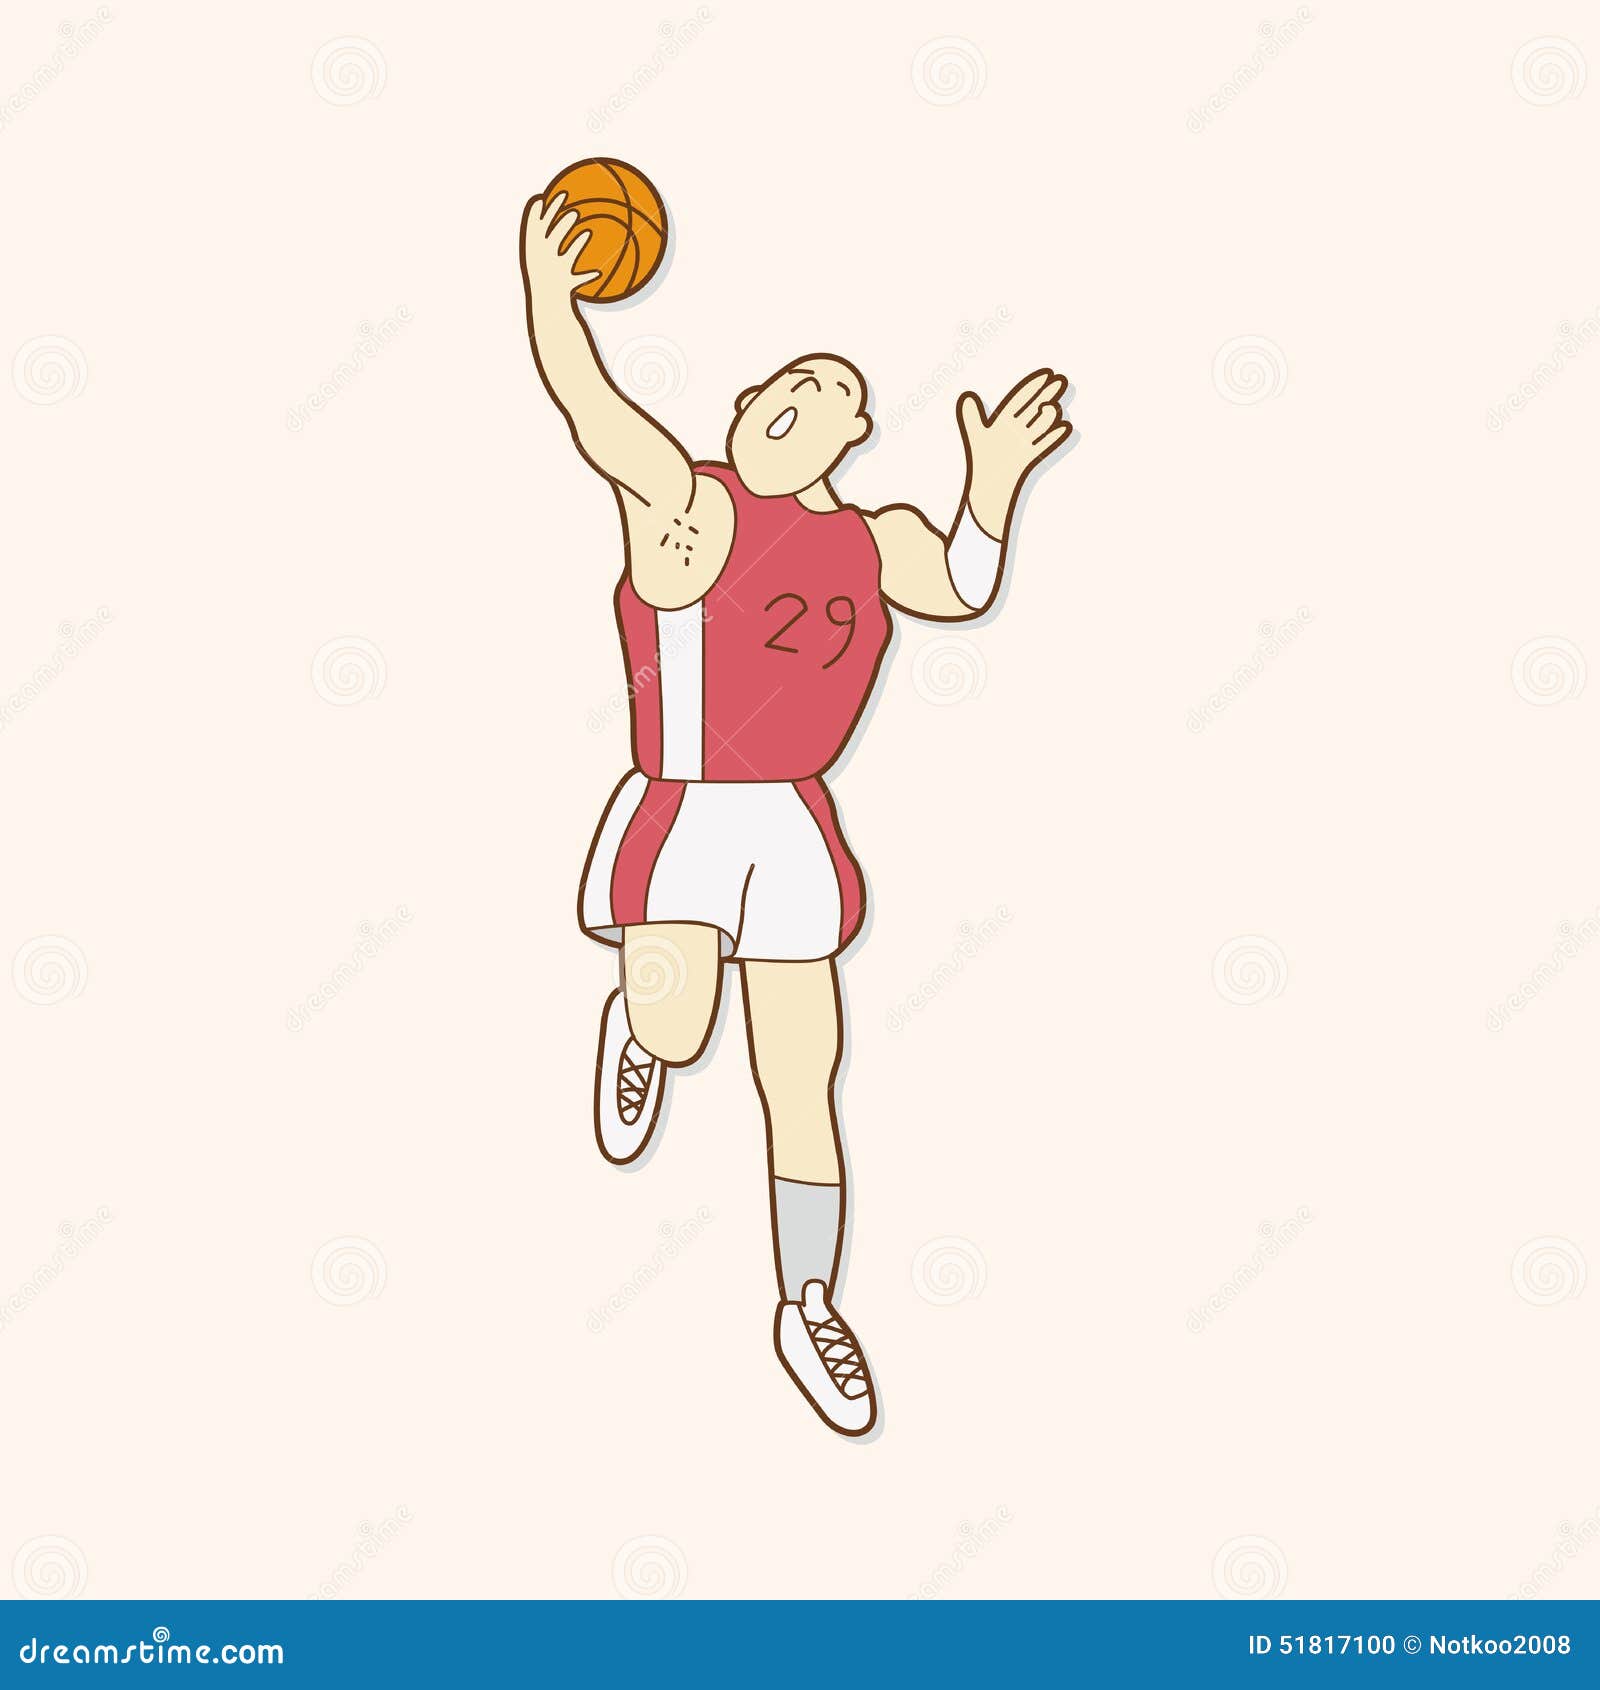 Basketball Player Elements Vector,eps Stock Vector - Illustration of ...